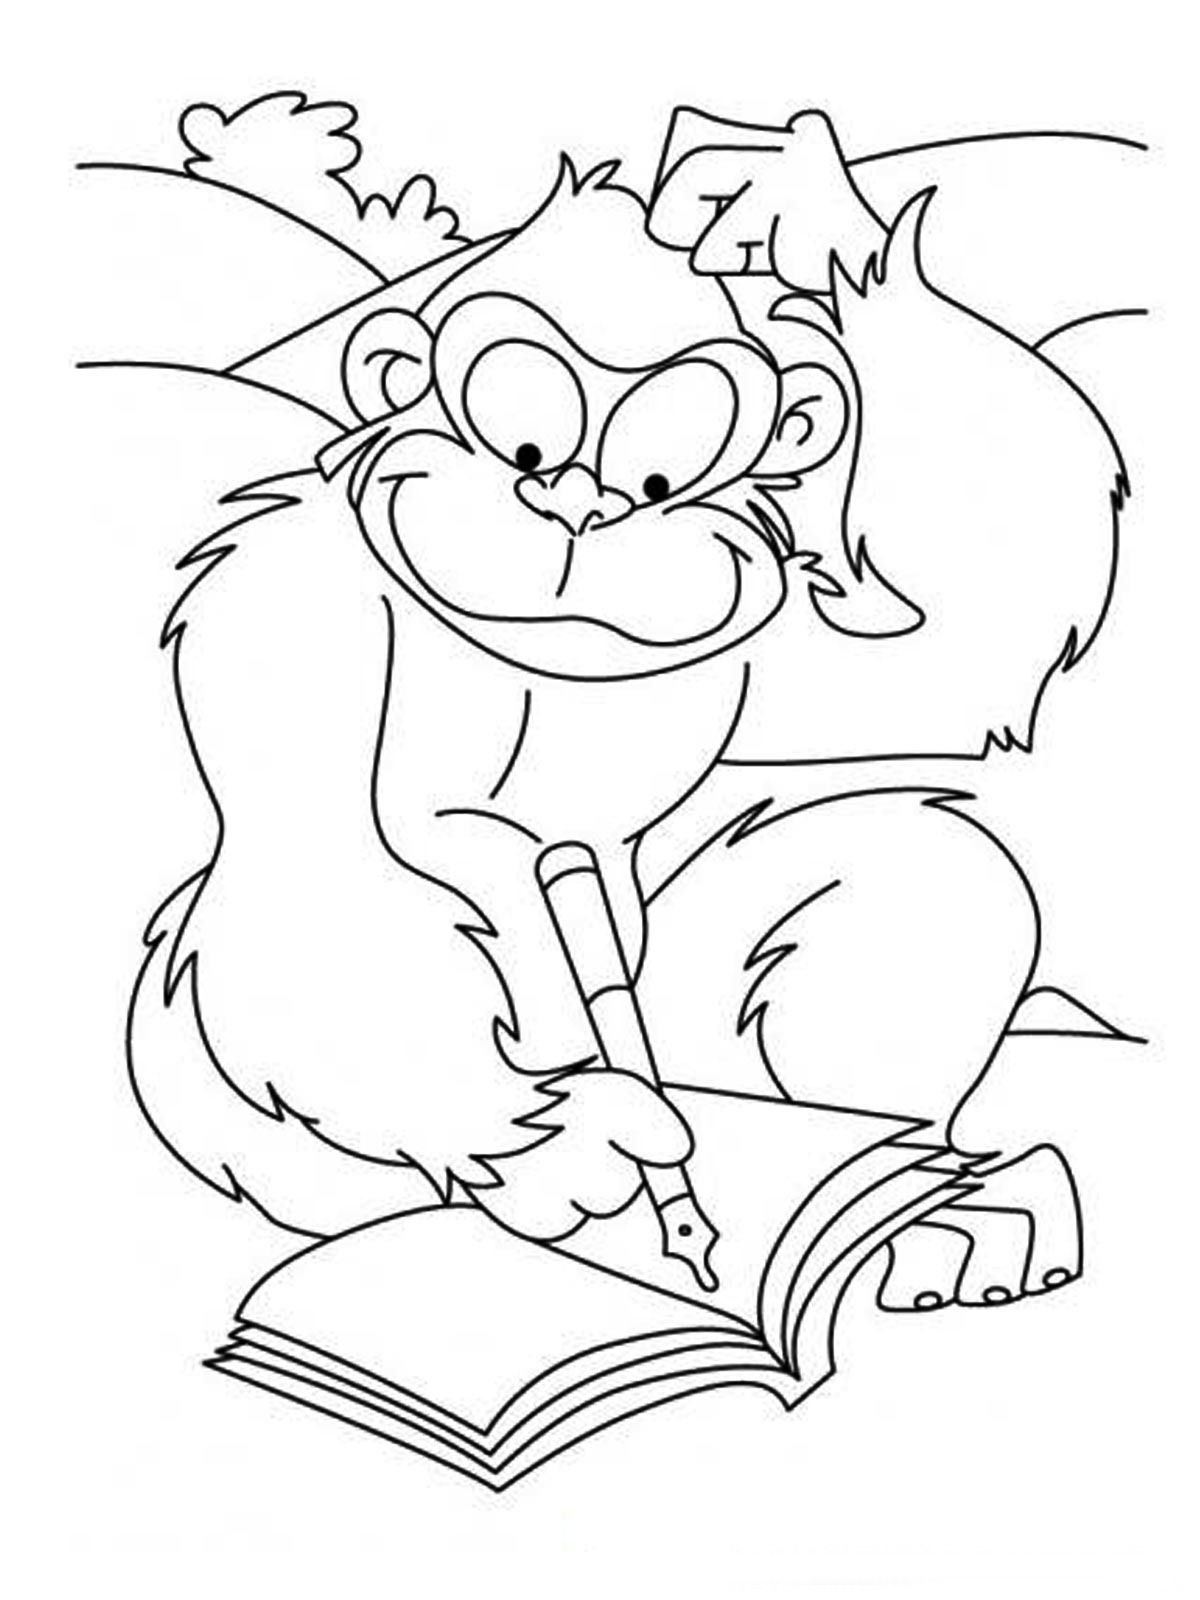 Funny Animal 22 For Kids Coloring Page